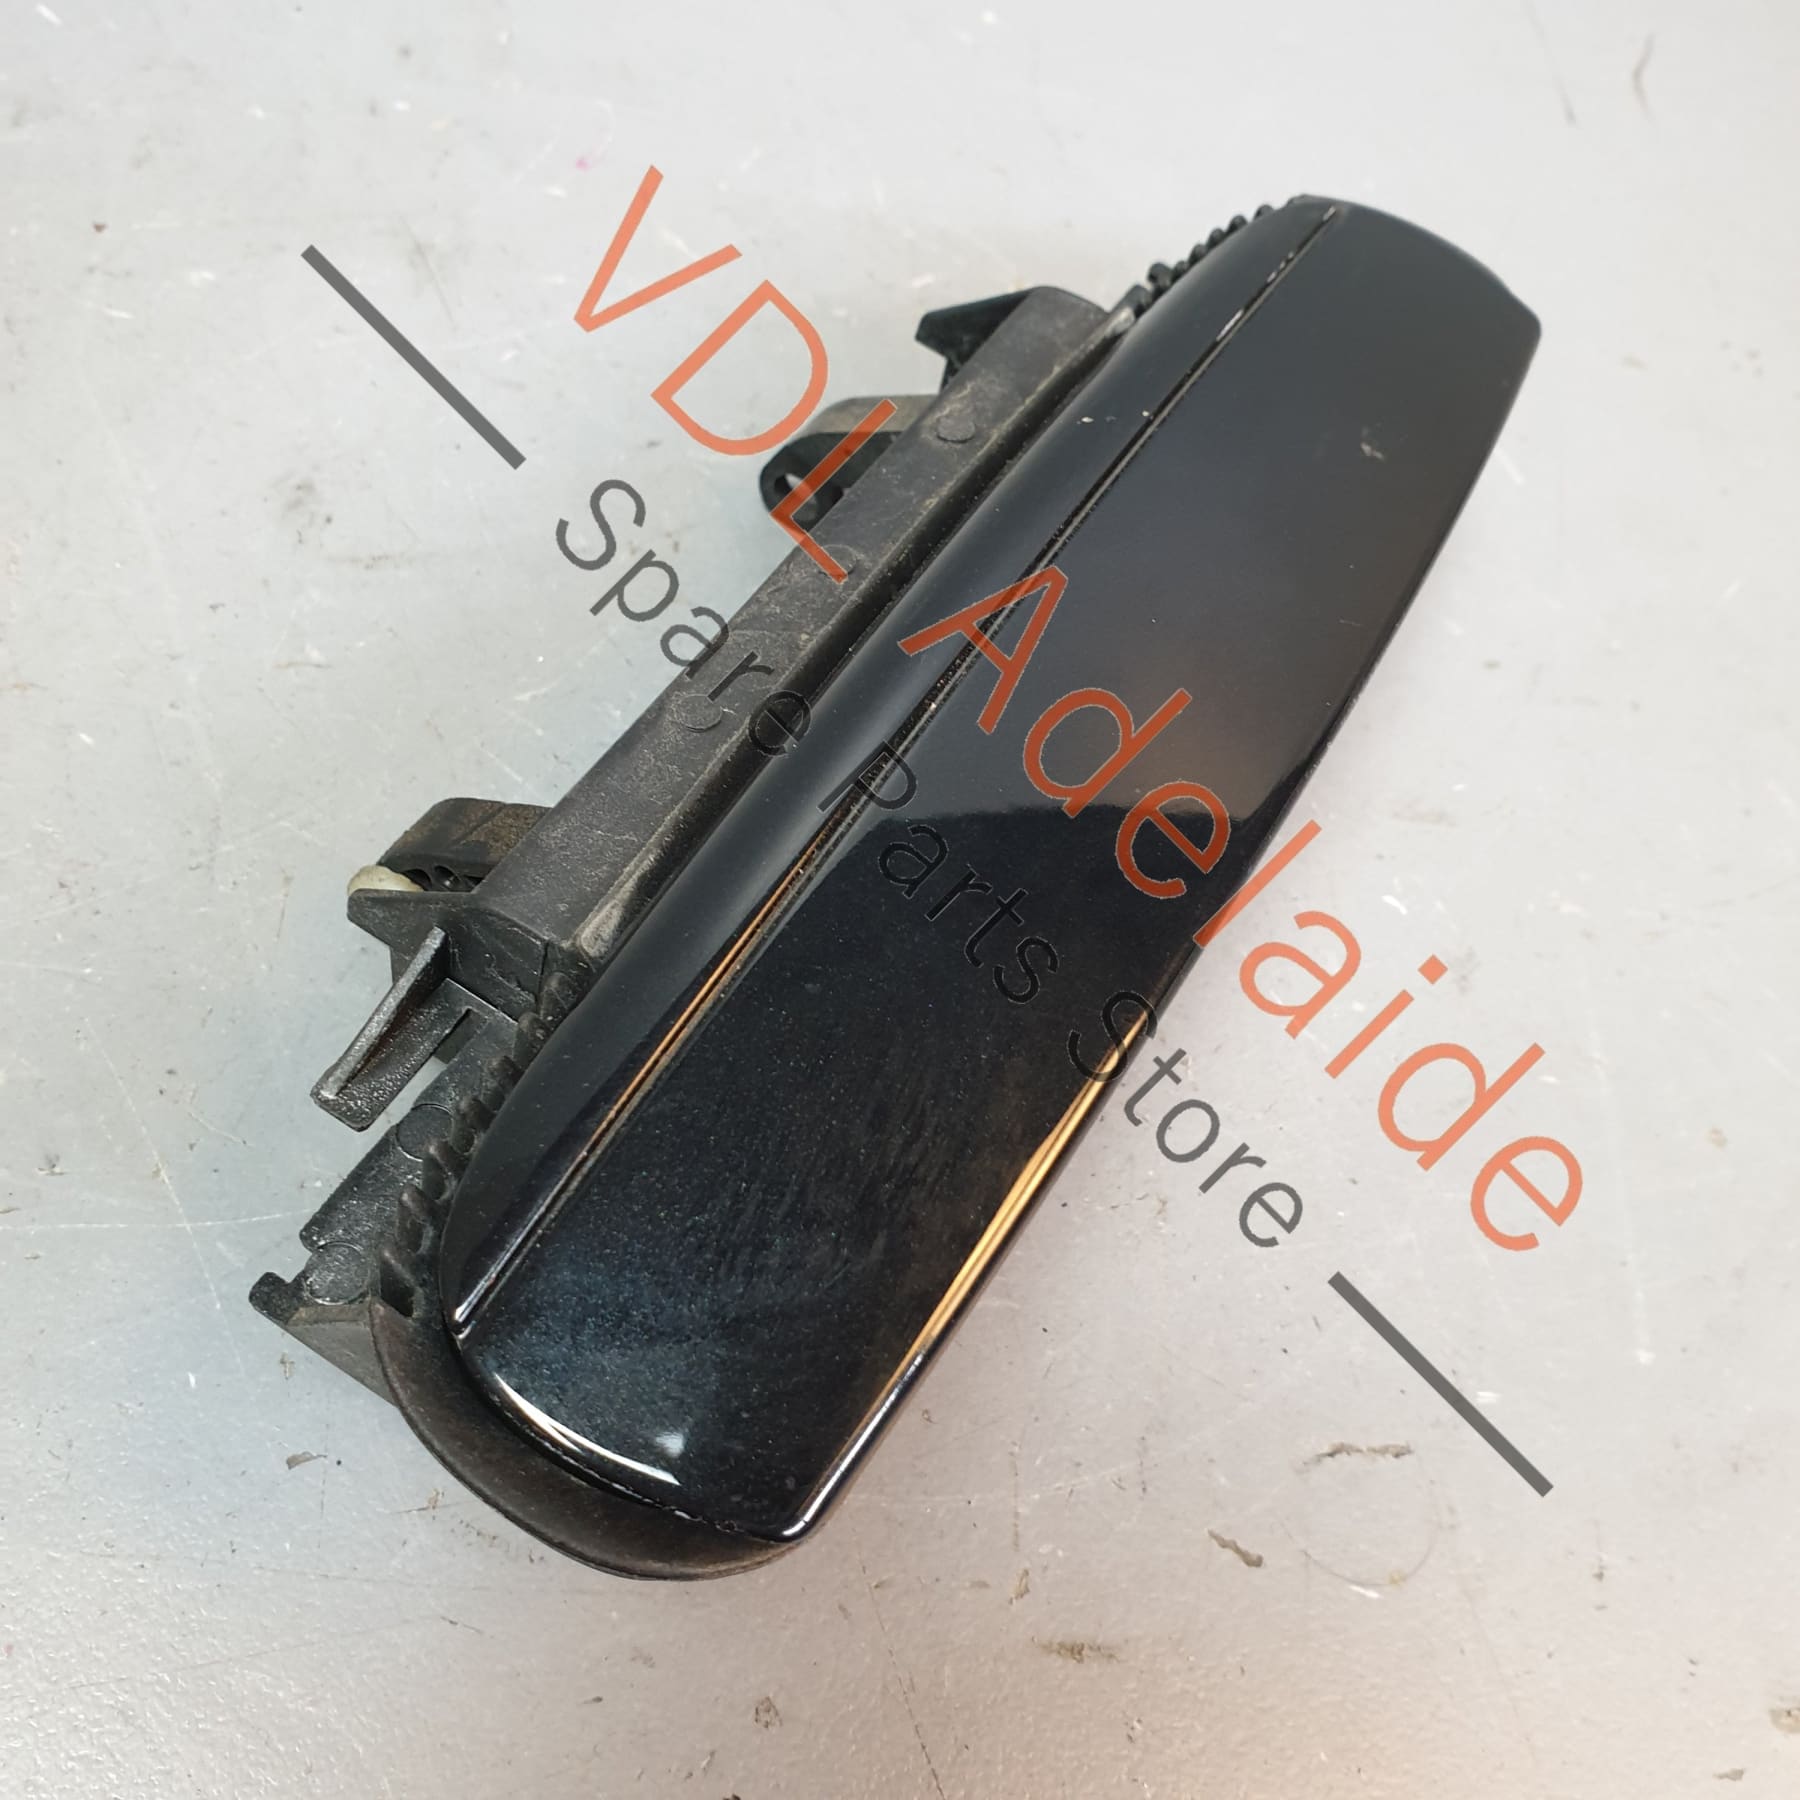 4B0839885 8P0837207 Audi A3 S3 8P Passenger Front or Rear Left or Right Exterior Door Handle 4B0839885 8P0837207 4F0839239 GRU